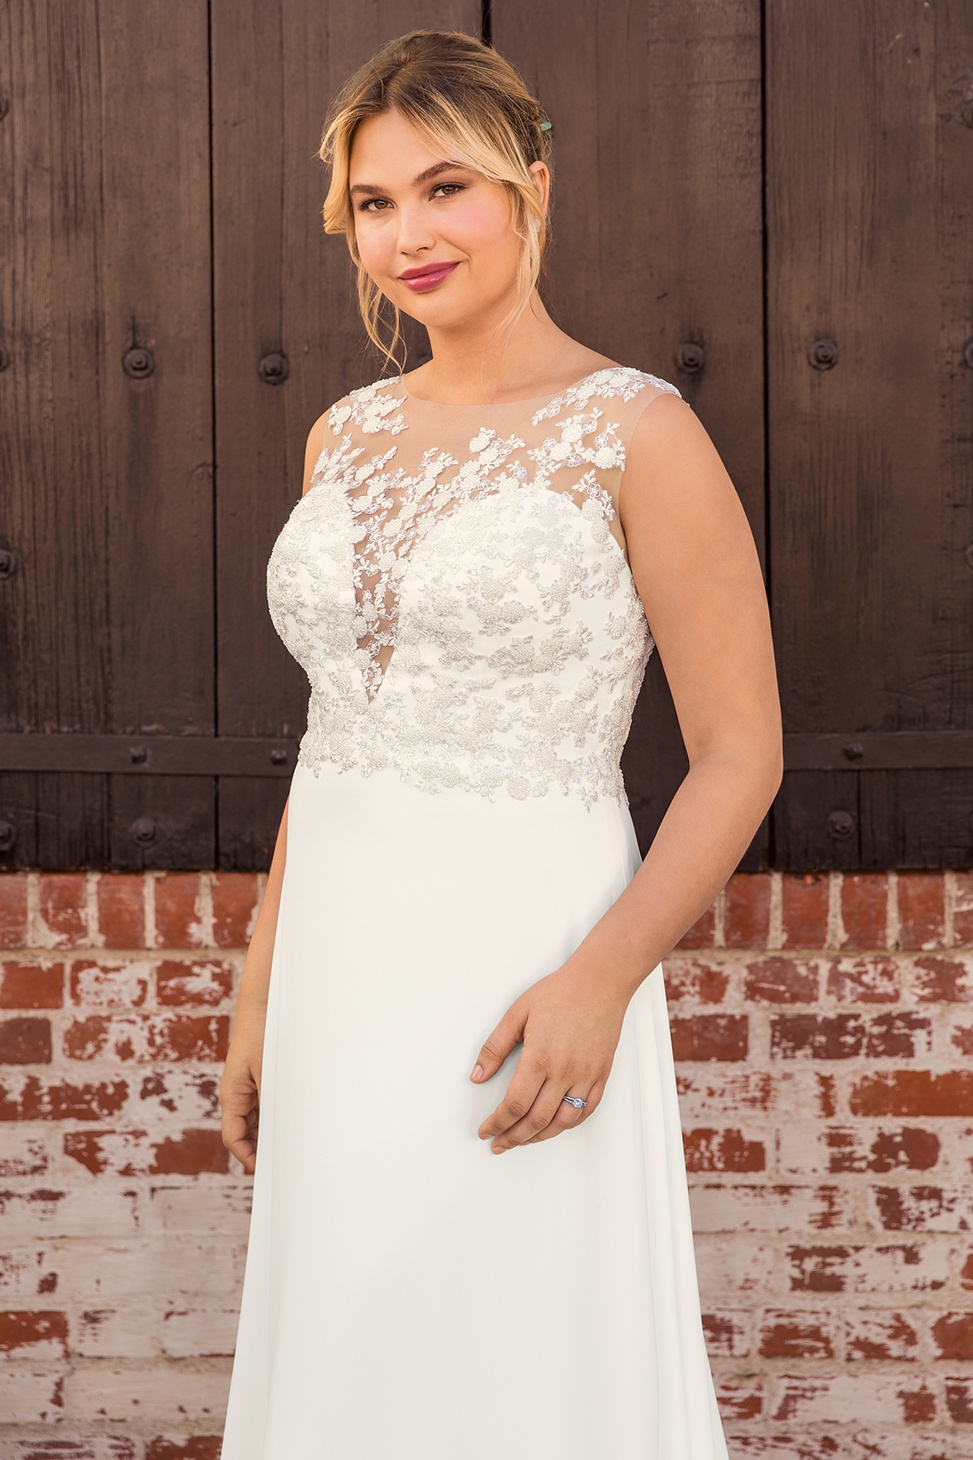 plus size wedding dress from beloved by casablanca bridal with plunging neckline and illusion straps